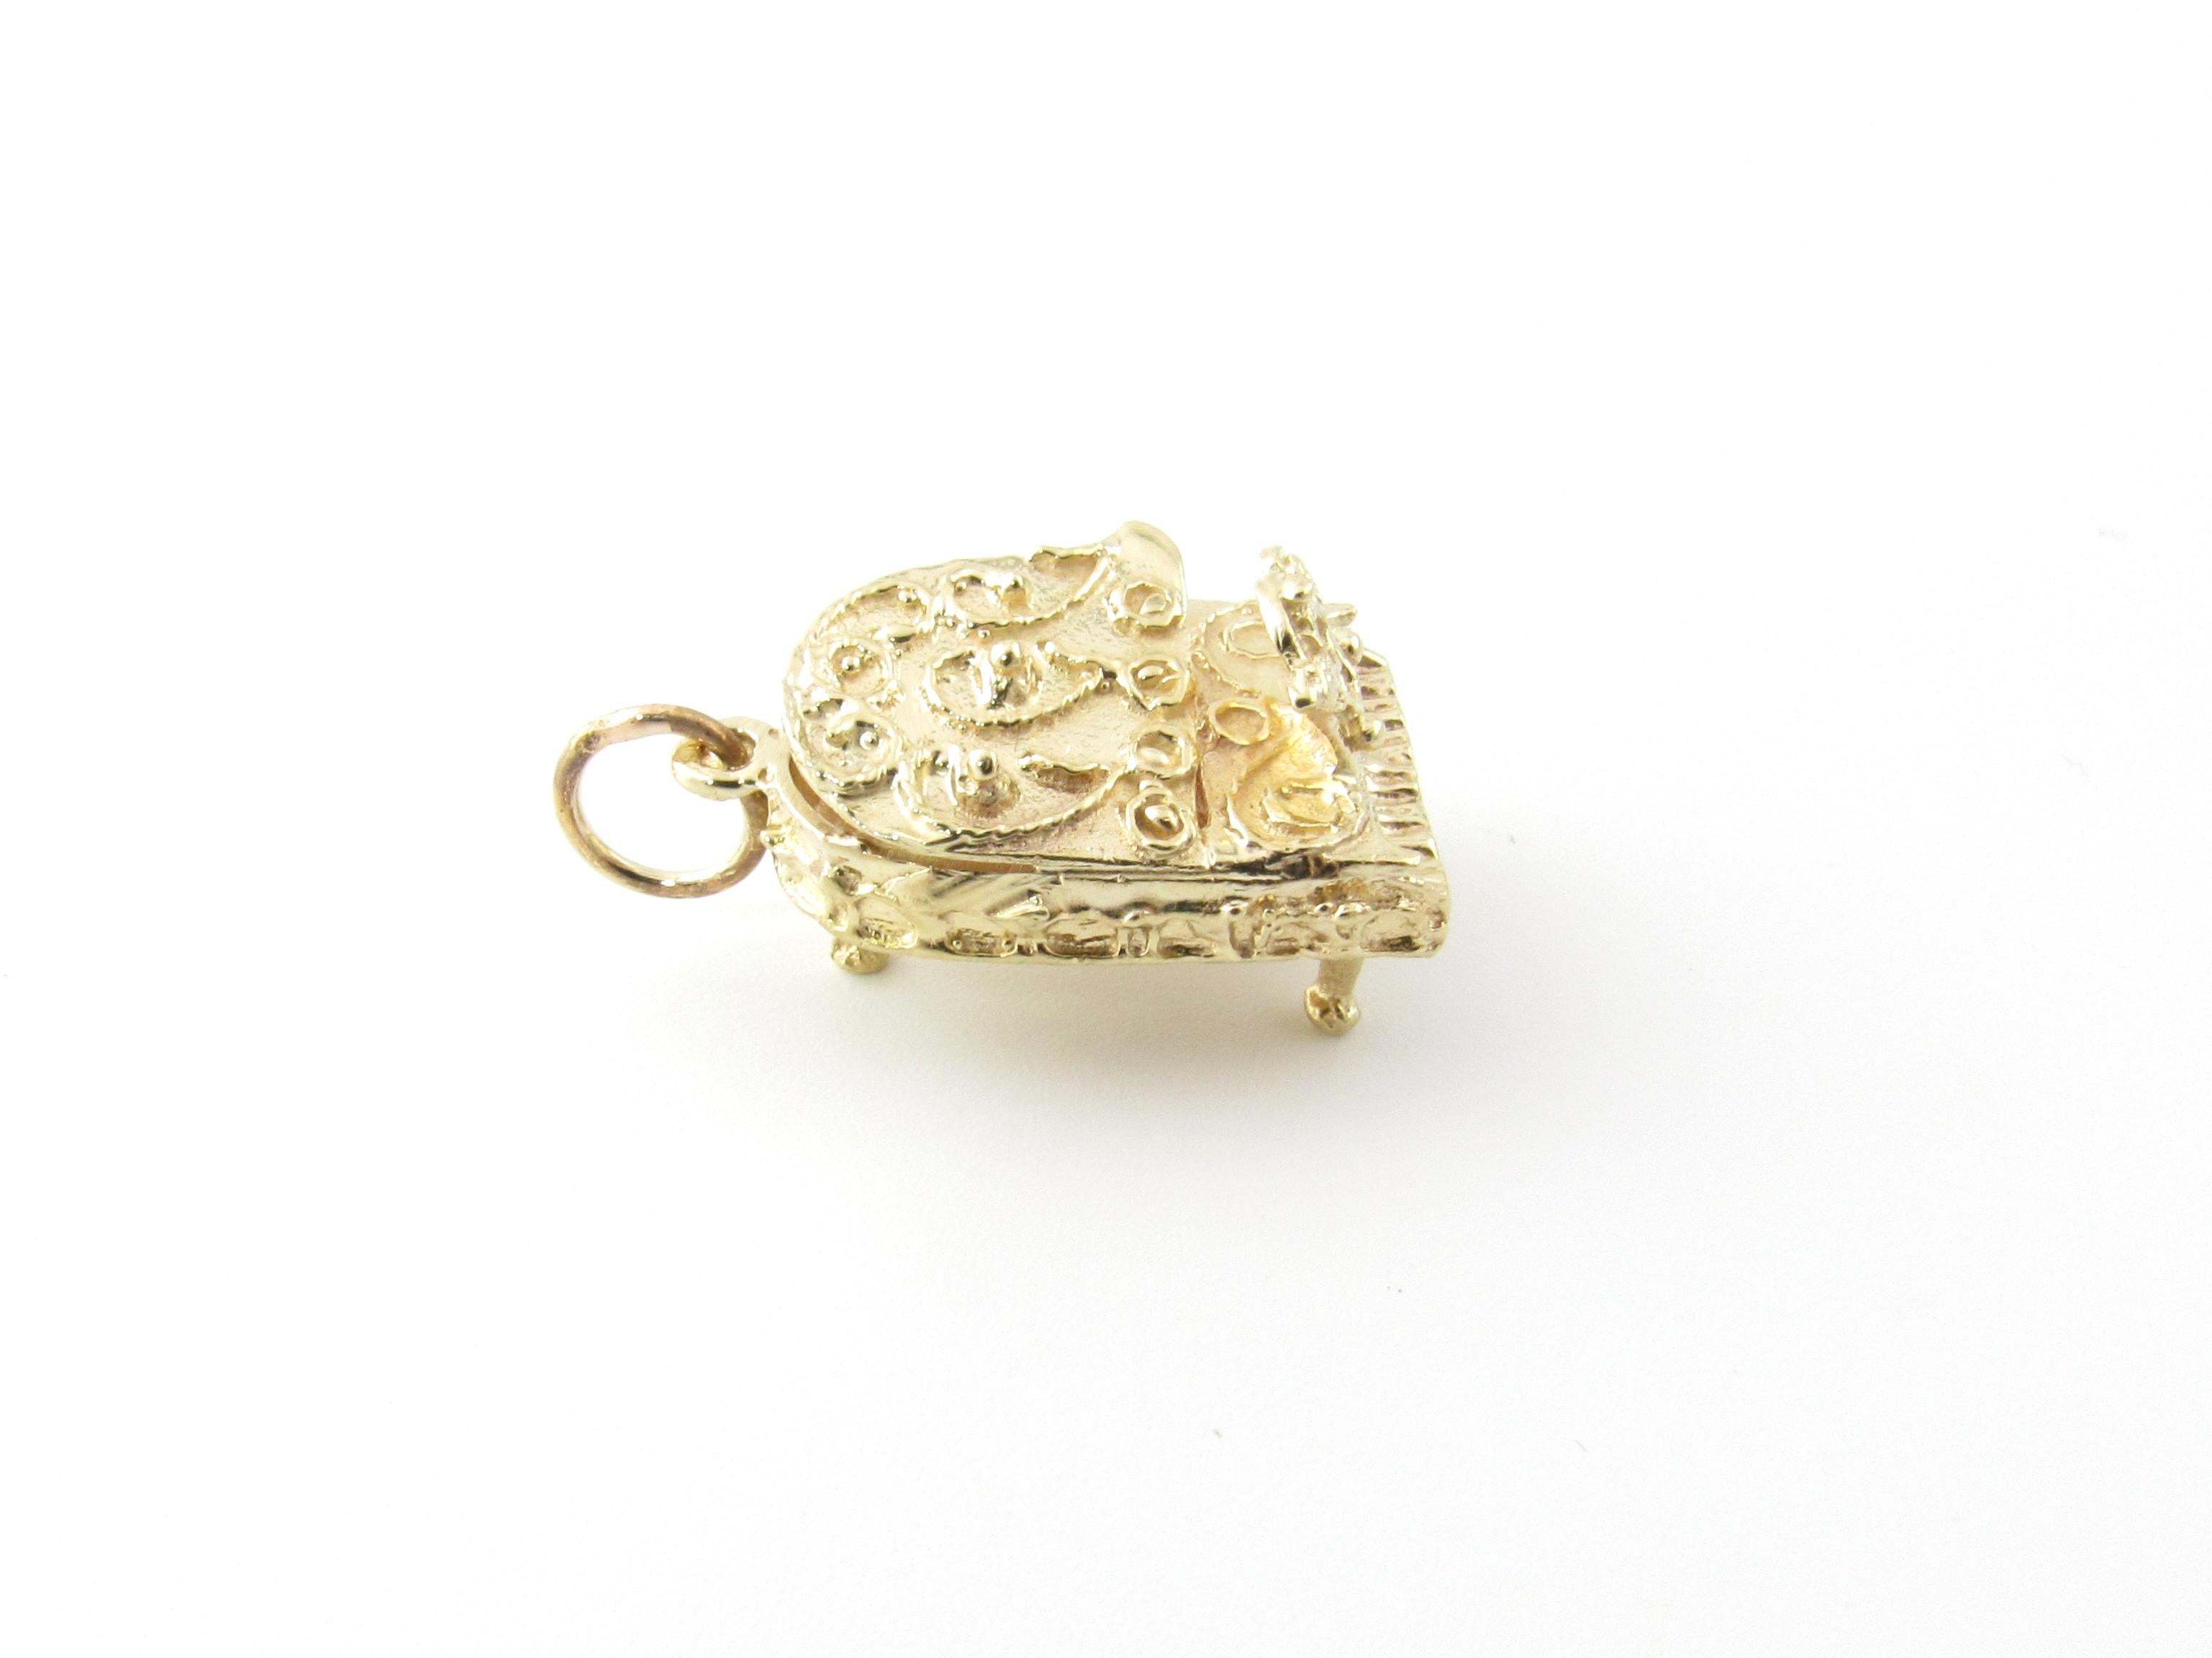 Vintage 14 Karat Yellow Gold Grand Piano Charm

Perfect gift for the musician in your life!

This lovely 3D charm features a miniature grand piano exquisitely detailed in 14K yellow gold.

Size: 23 mm x 15 mm (actual charm)

Weight: 3.1 dwt. / 4.9